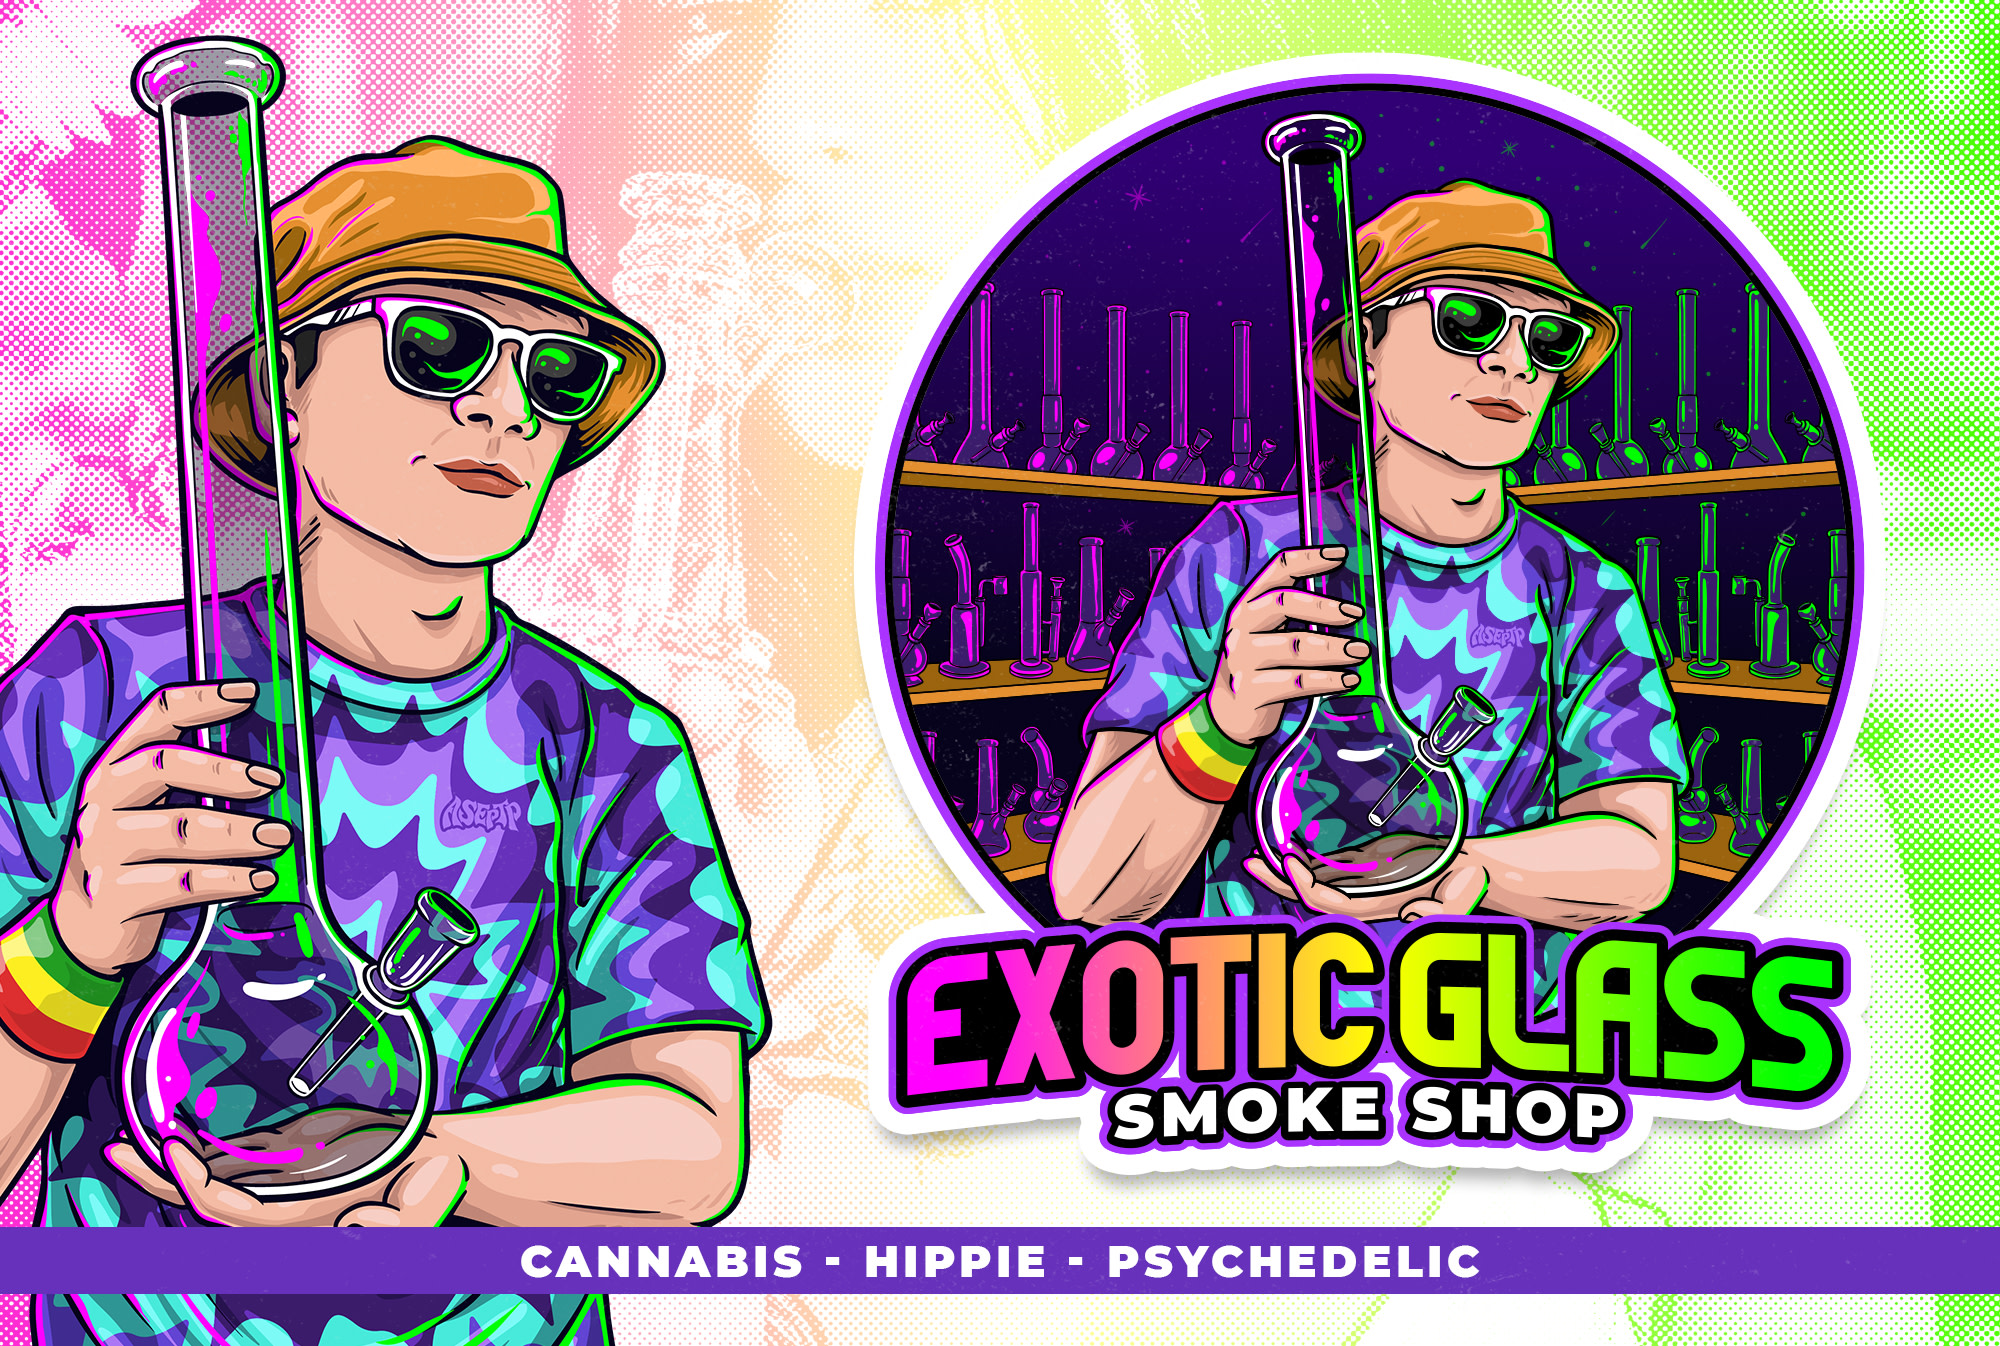 Design cannabis, weed, hippie, psychedelic, and cartoon character with my  style by Aseptp | Fiverr